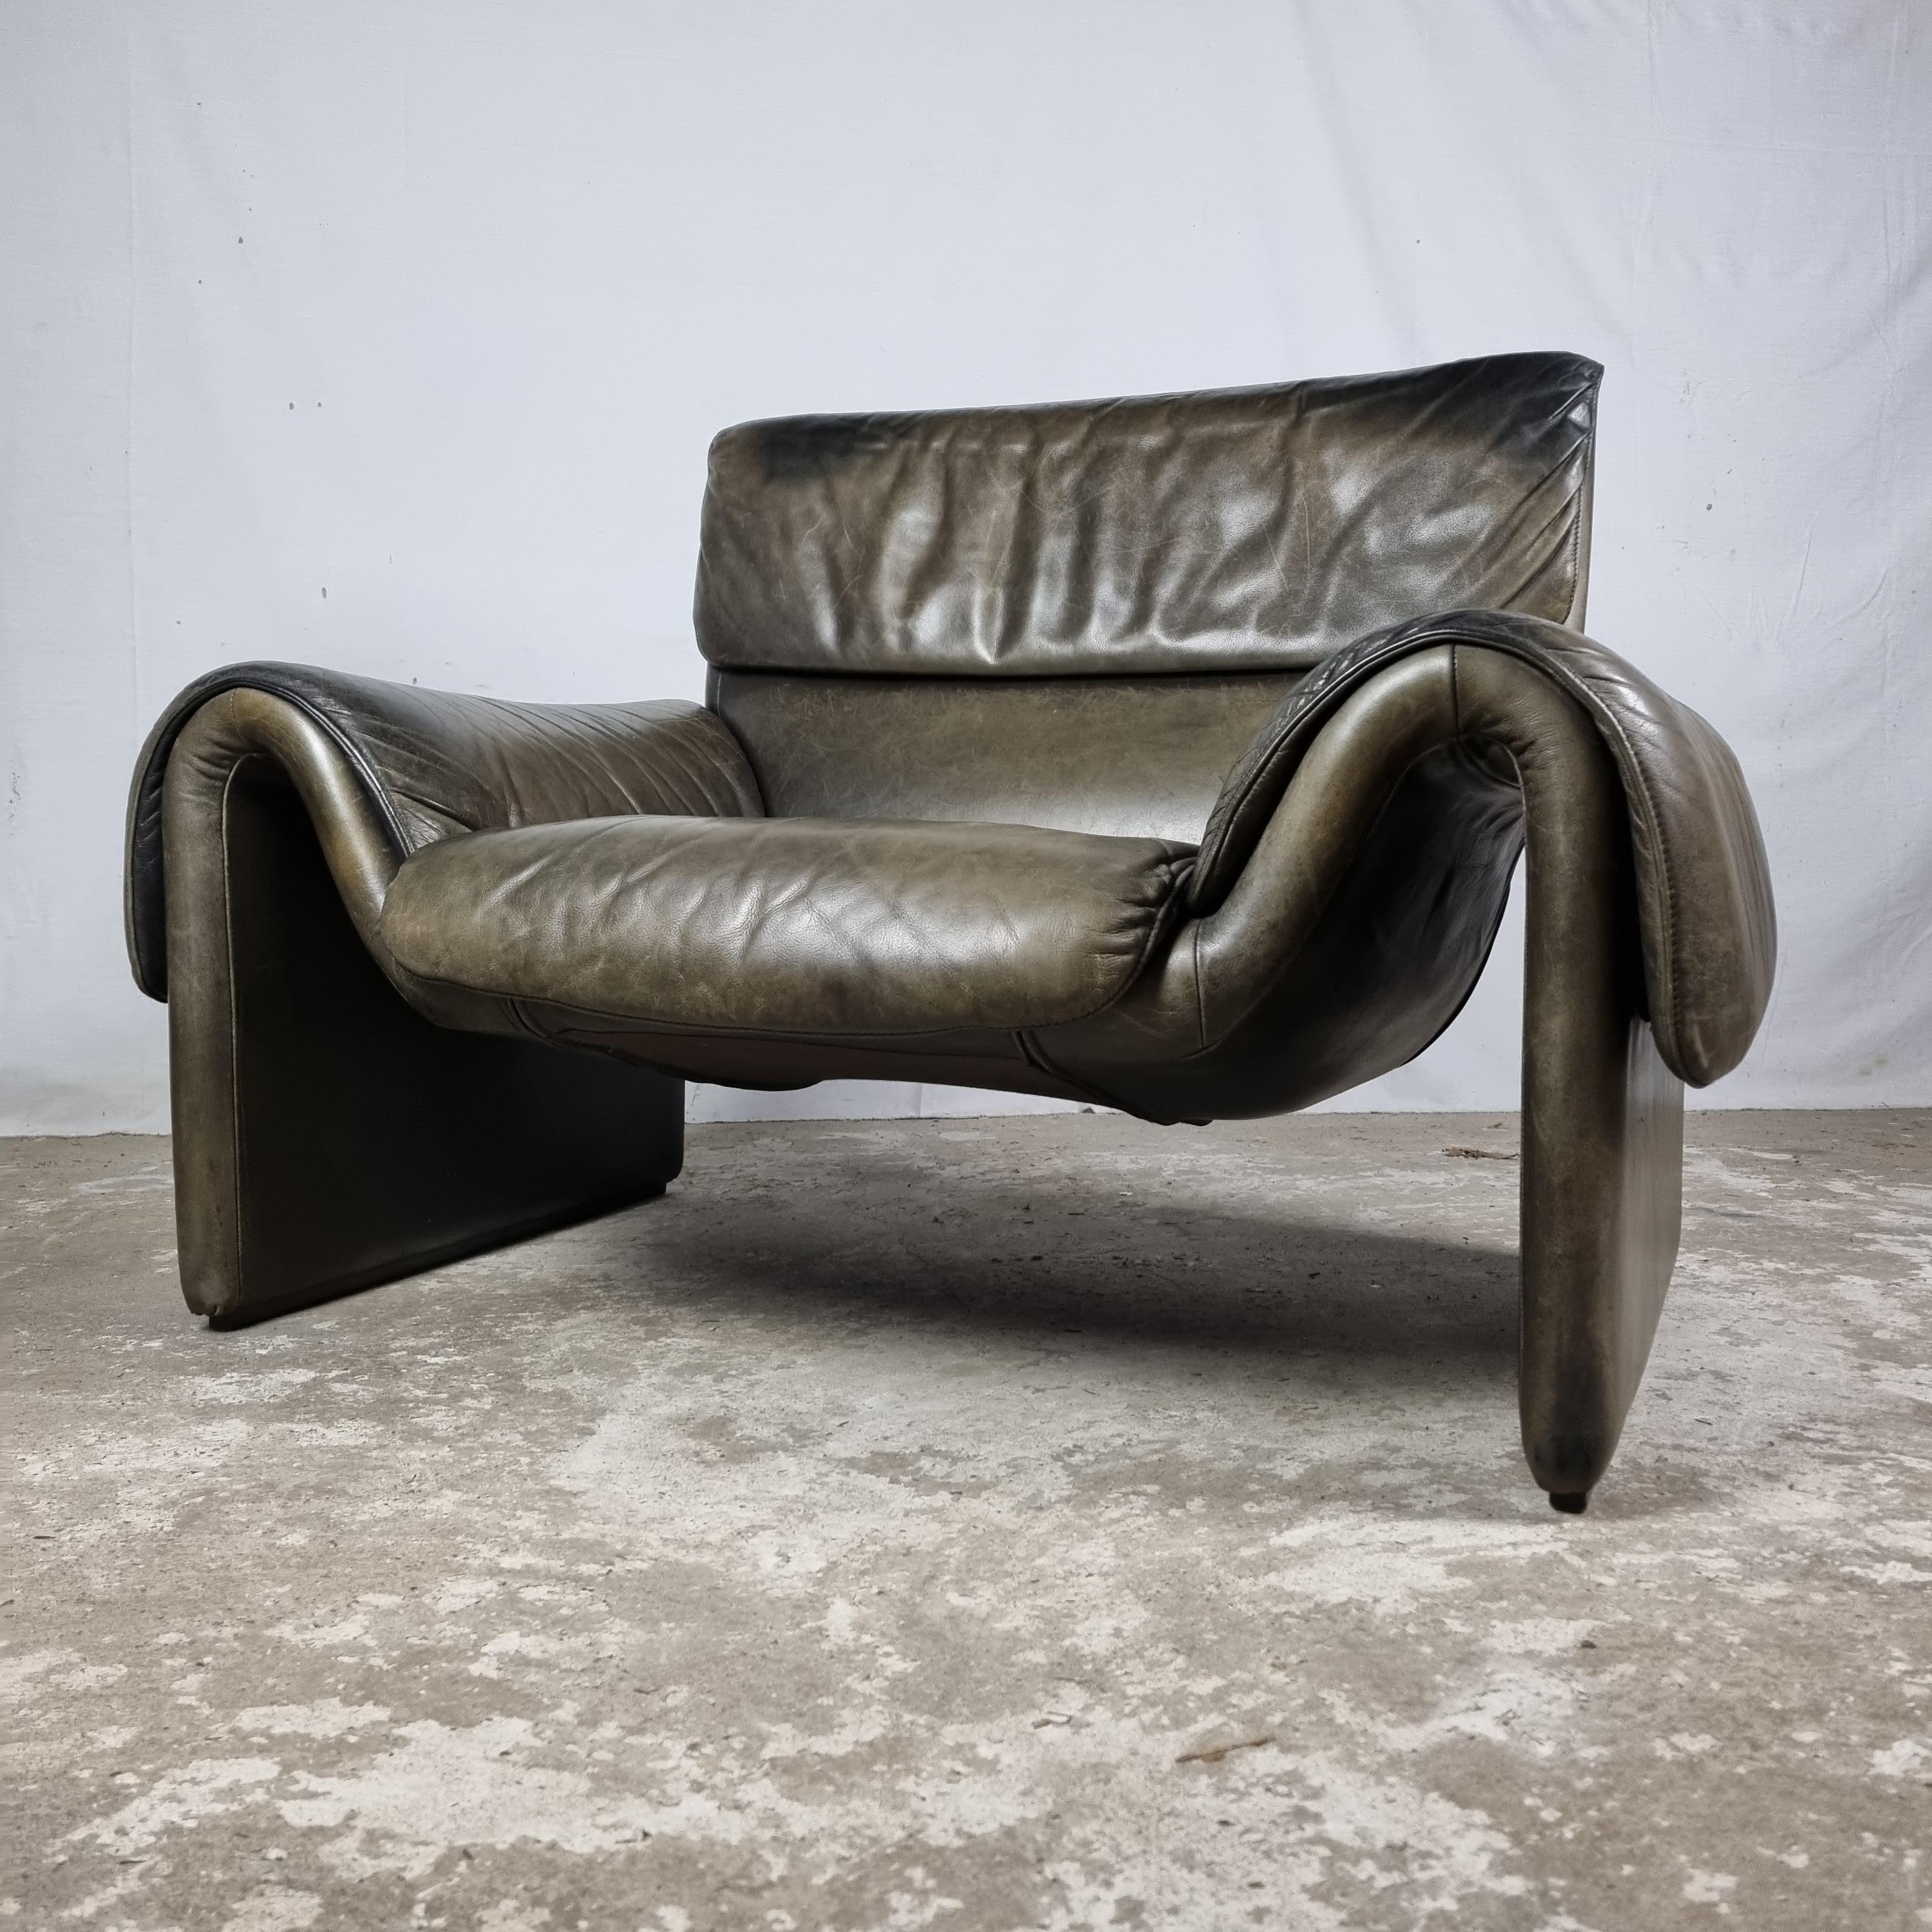 Original Mid-Century armchair by Swiss manufacturer De Sede from the 1970s. Known as the DS-2011/01 model.

The chair has a durable steel frame and the original buffalo leather upholstery. Indicative of the classic De Sede constructions style,